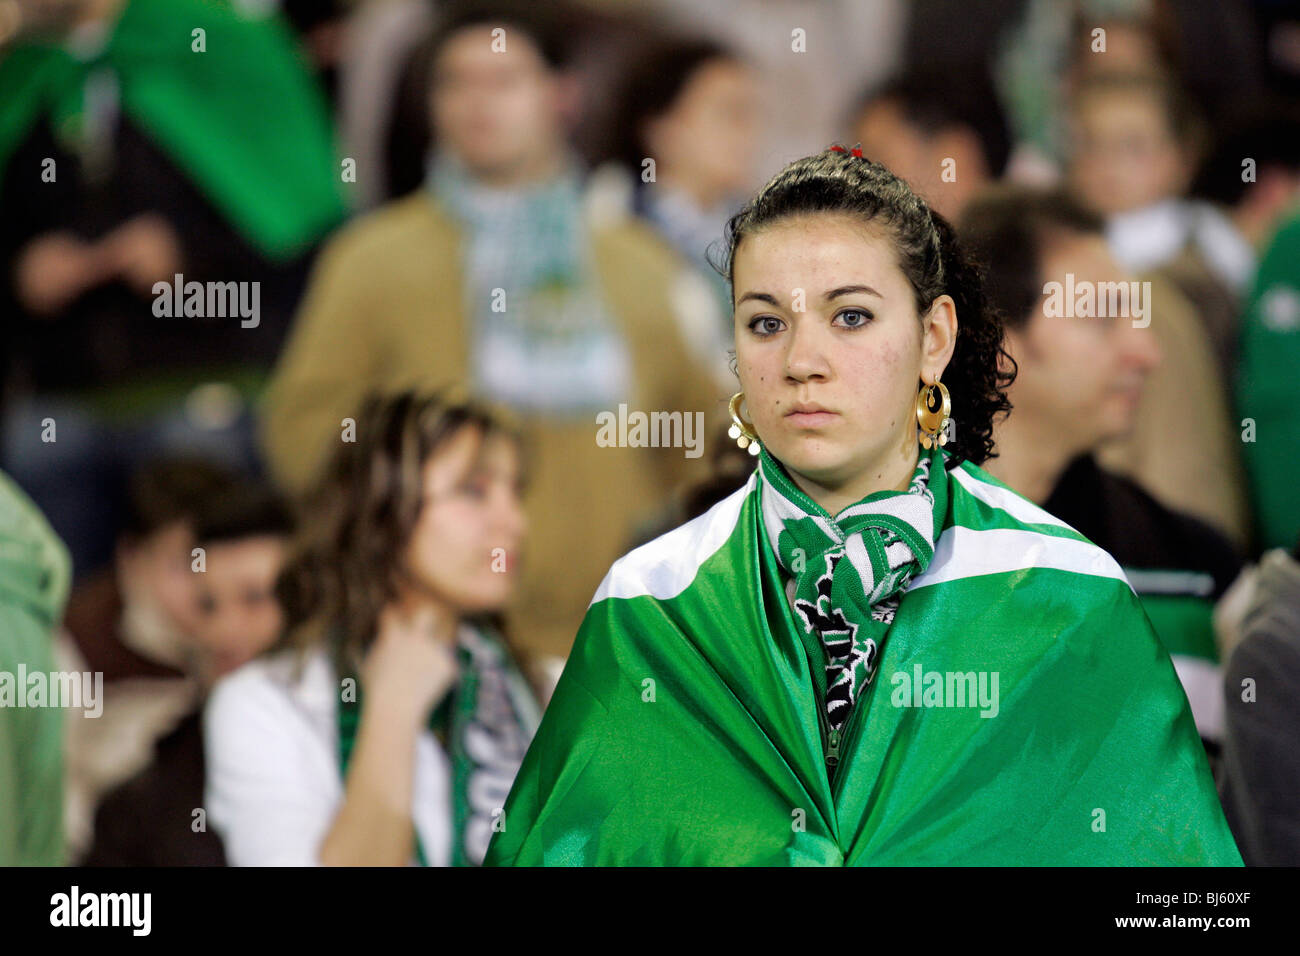 Real Betis Balompie Stock Photos & Real Betis Balompie Stock Images - Alamy1300 x 956